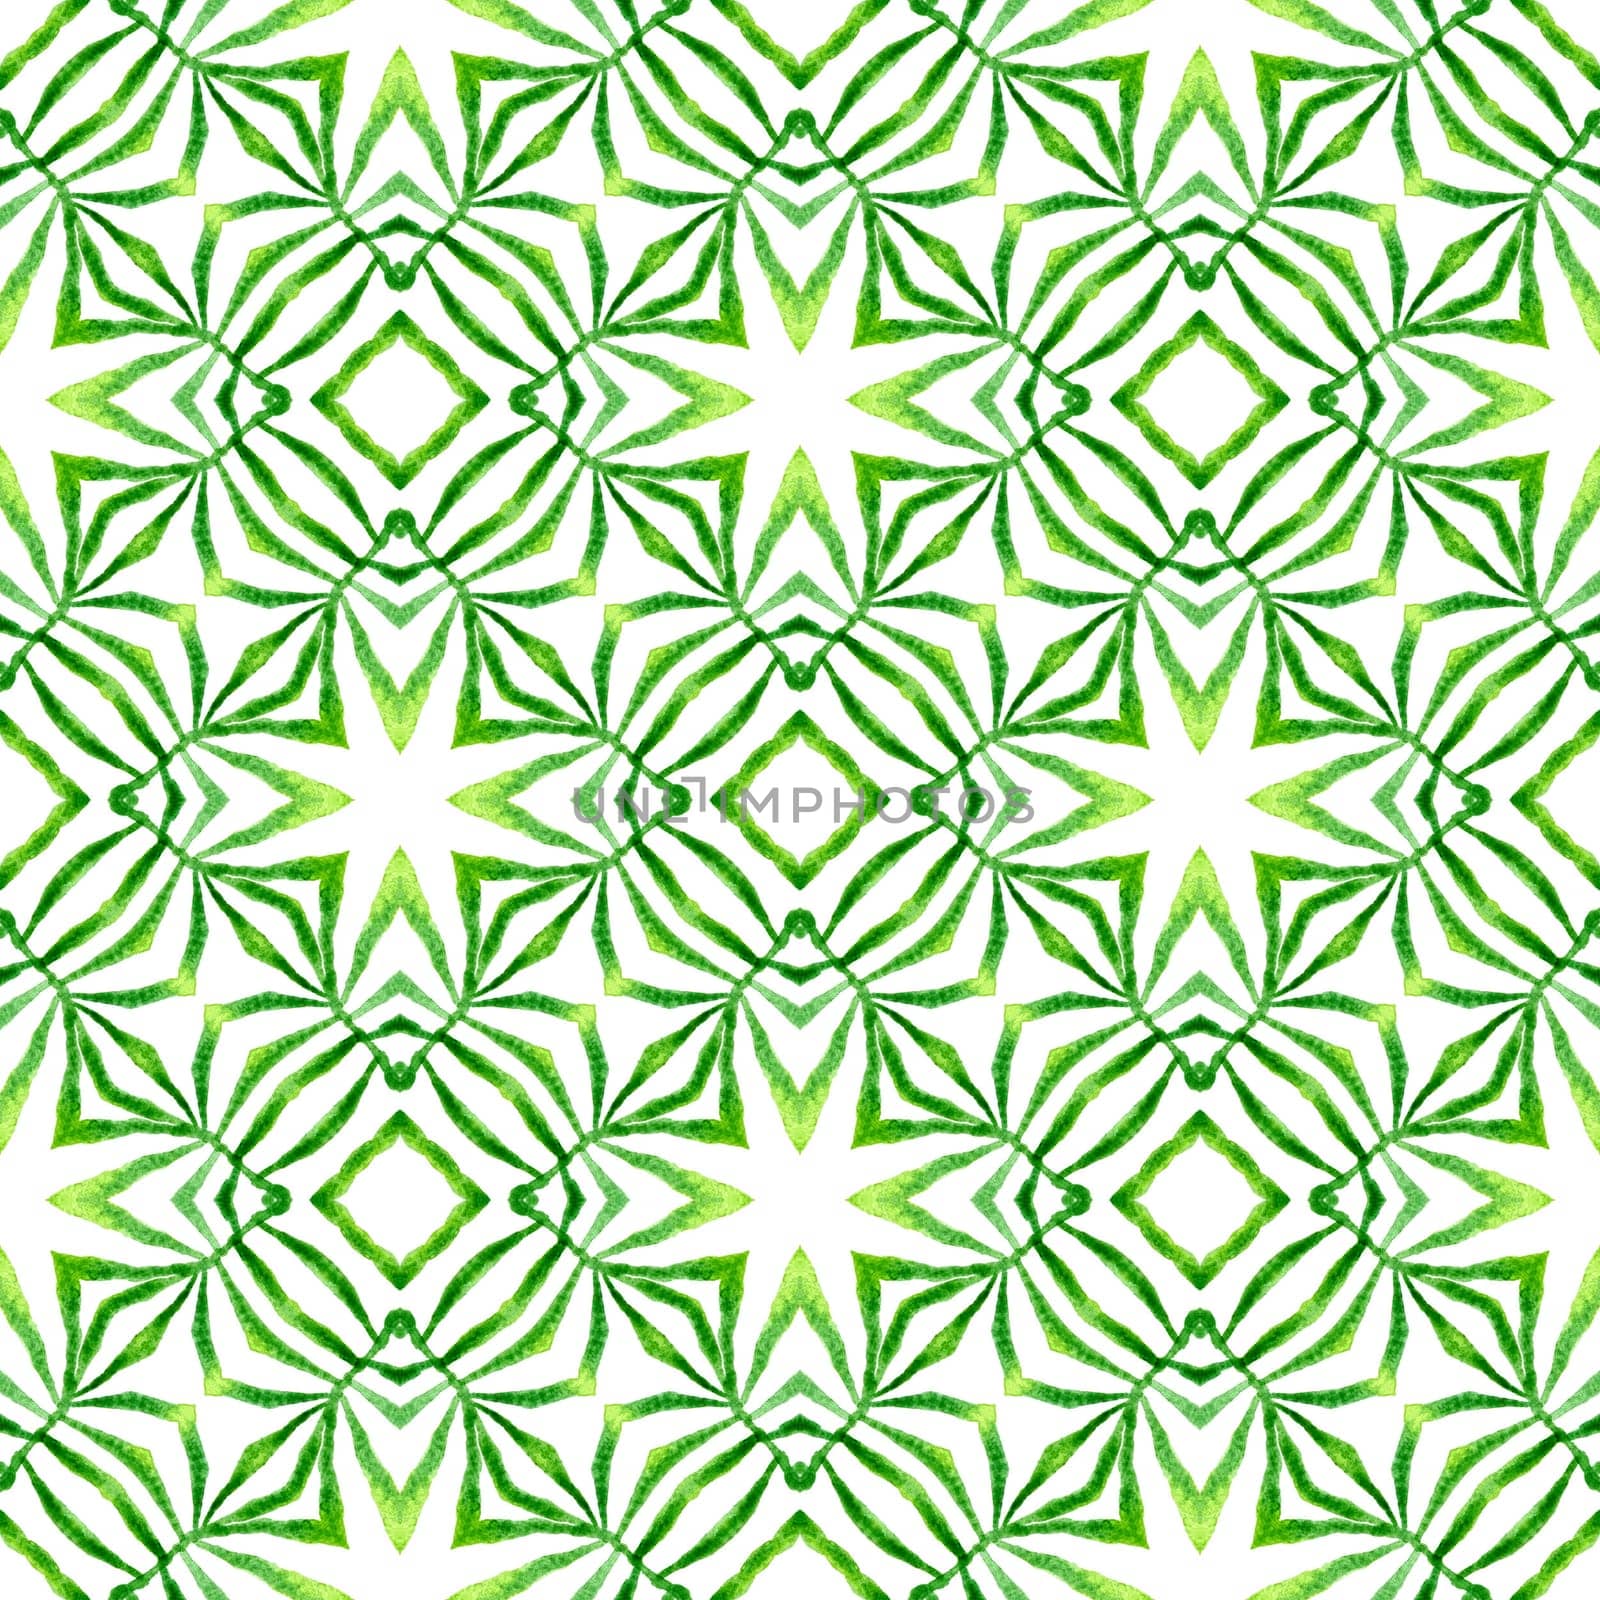 Ethnic hand painted pattern. Green curious boho chic summer design. Watercolor summer ethnic border pattern. Textile ready cool print, swimwear fabric, wallpaper, wrapping.